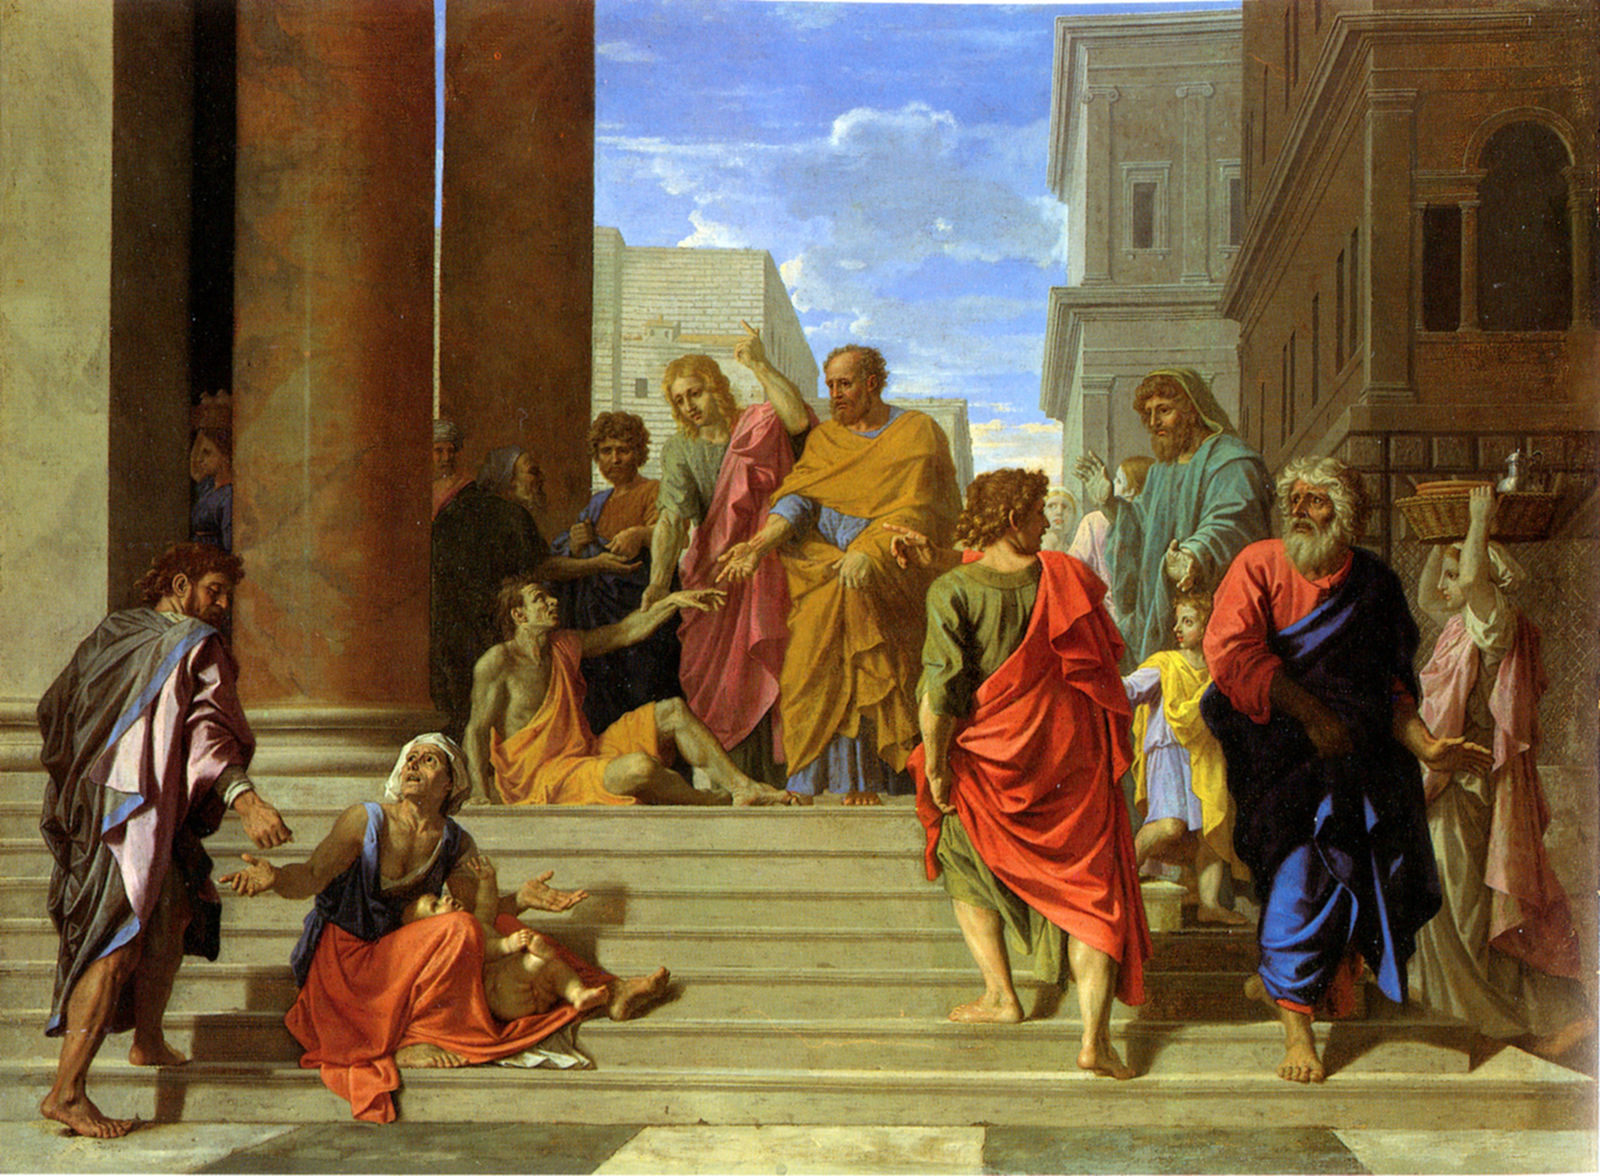 Peter and John Healing the Lame ManNicolas Poussin